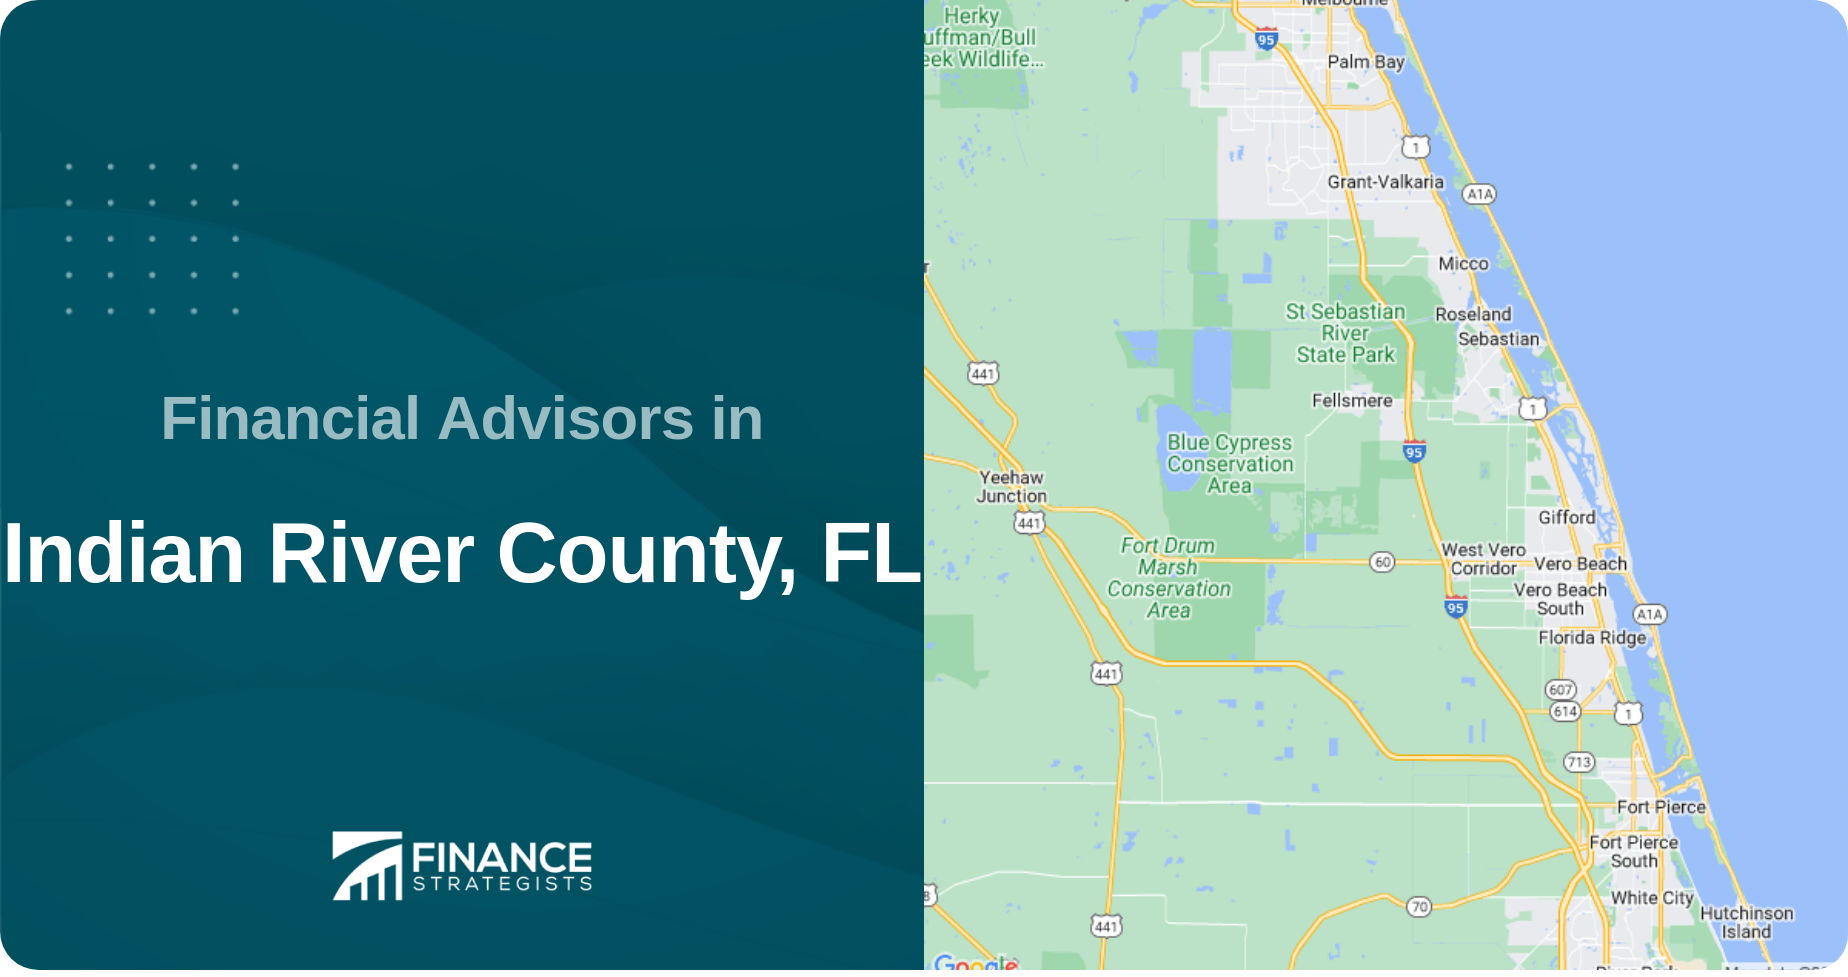 Financial Advisors in Indian River County, FL